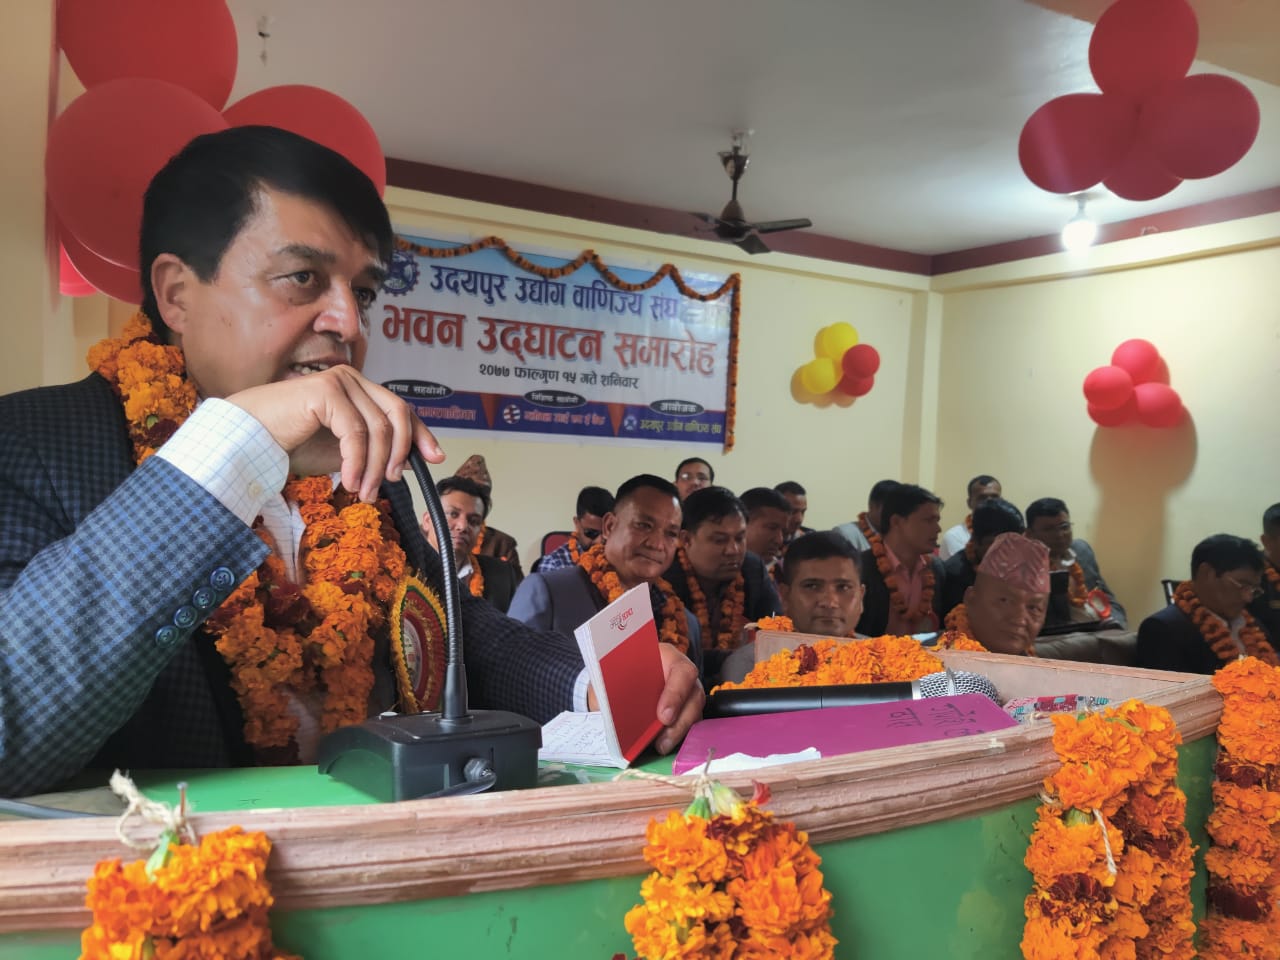 Rapid economic development possible through private sector: Dhakal